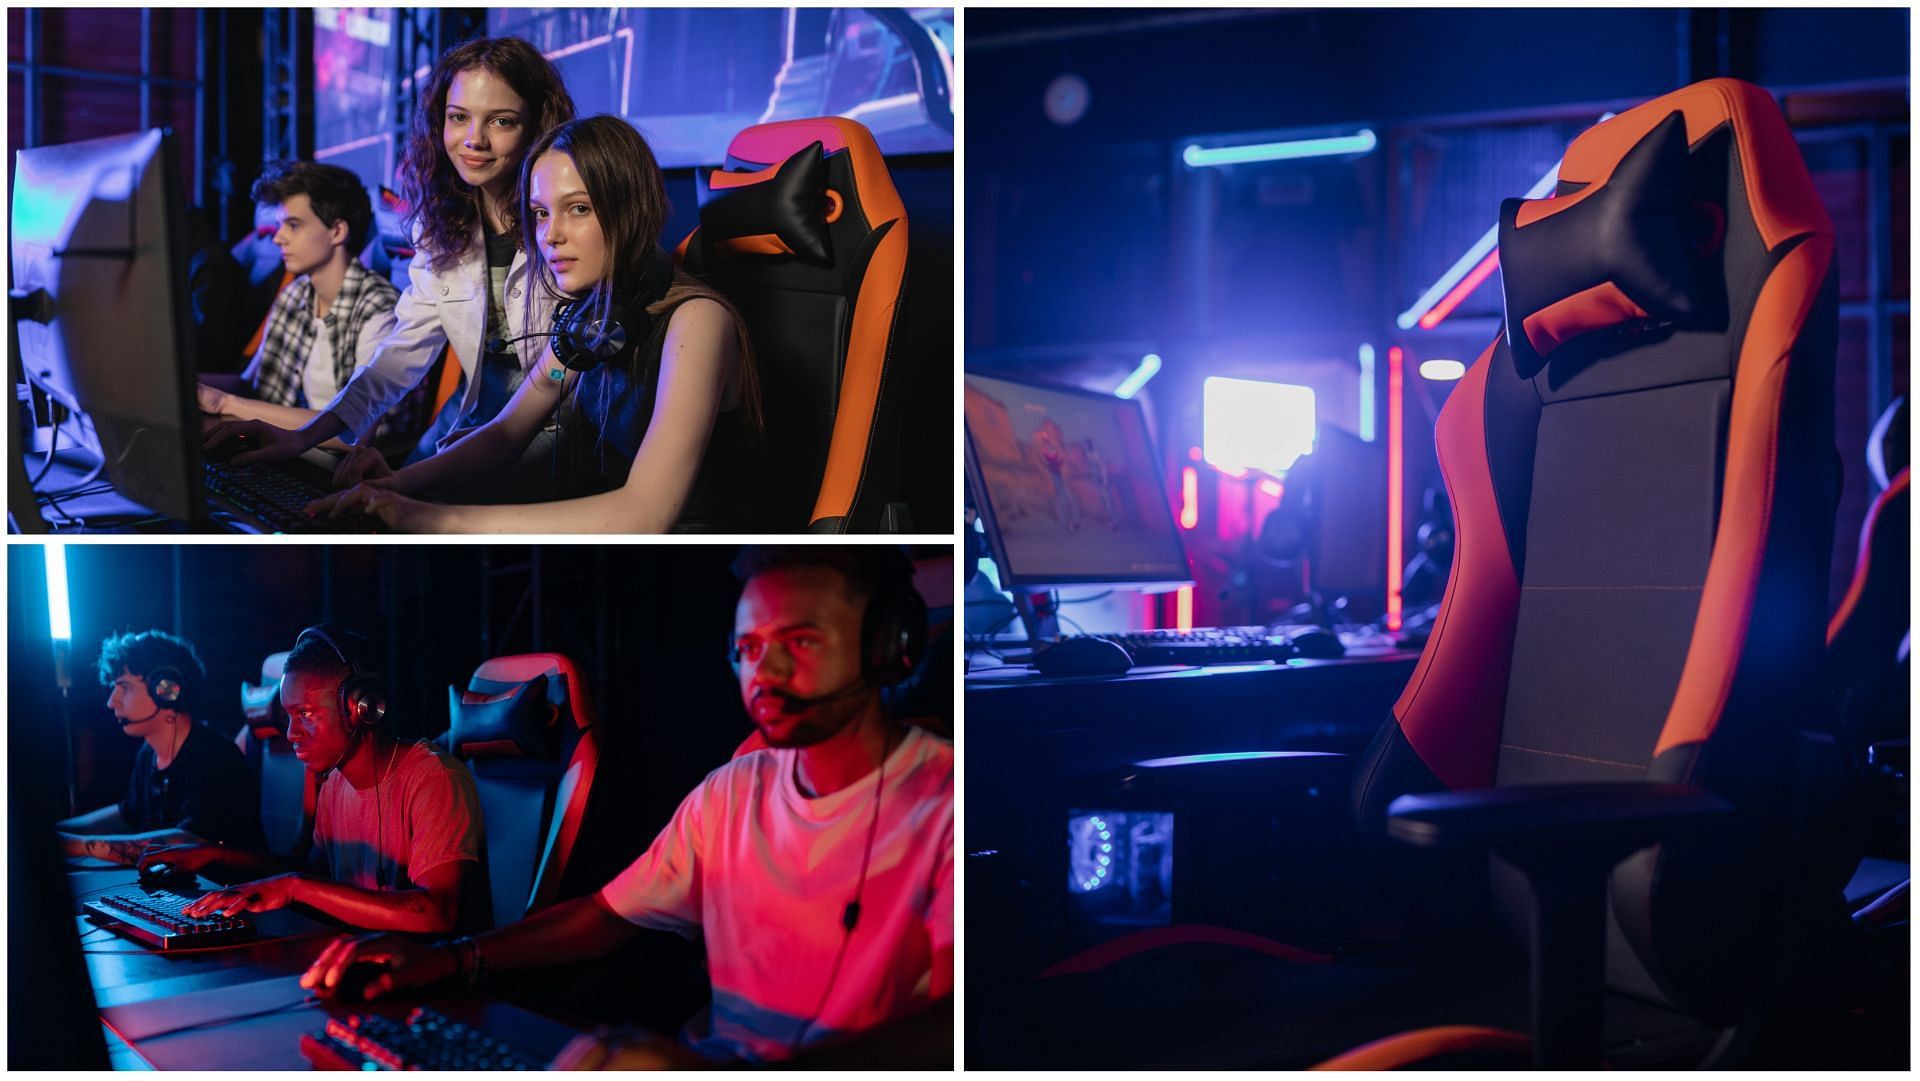 Gaming Chairs for gaming and work (Image via pexels.com)